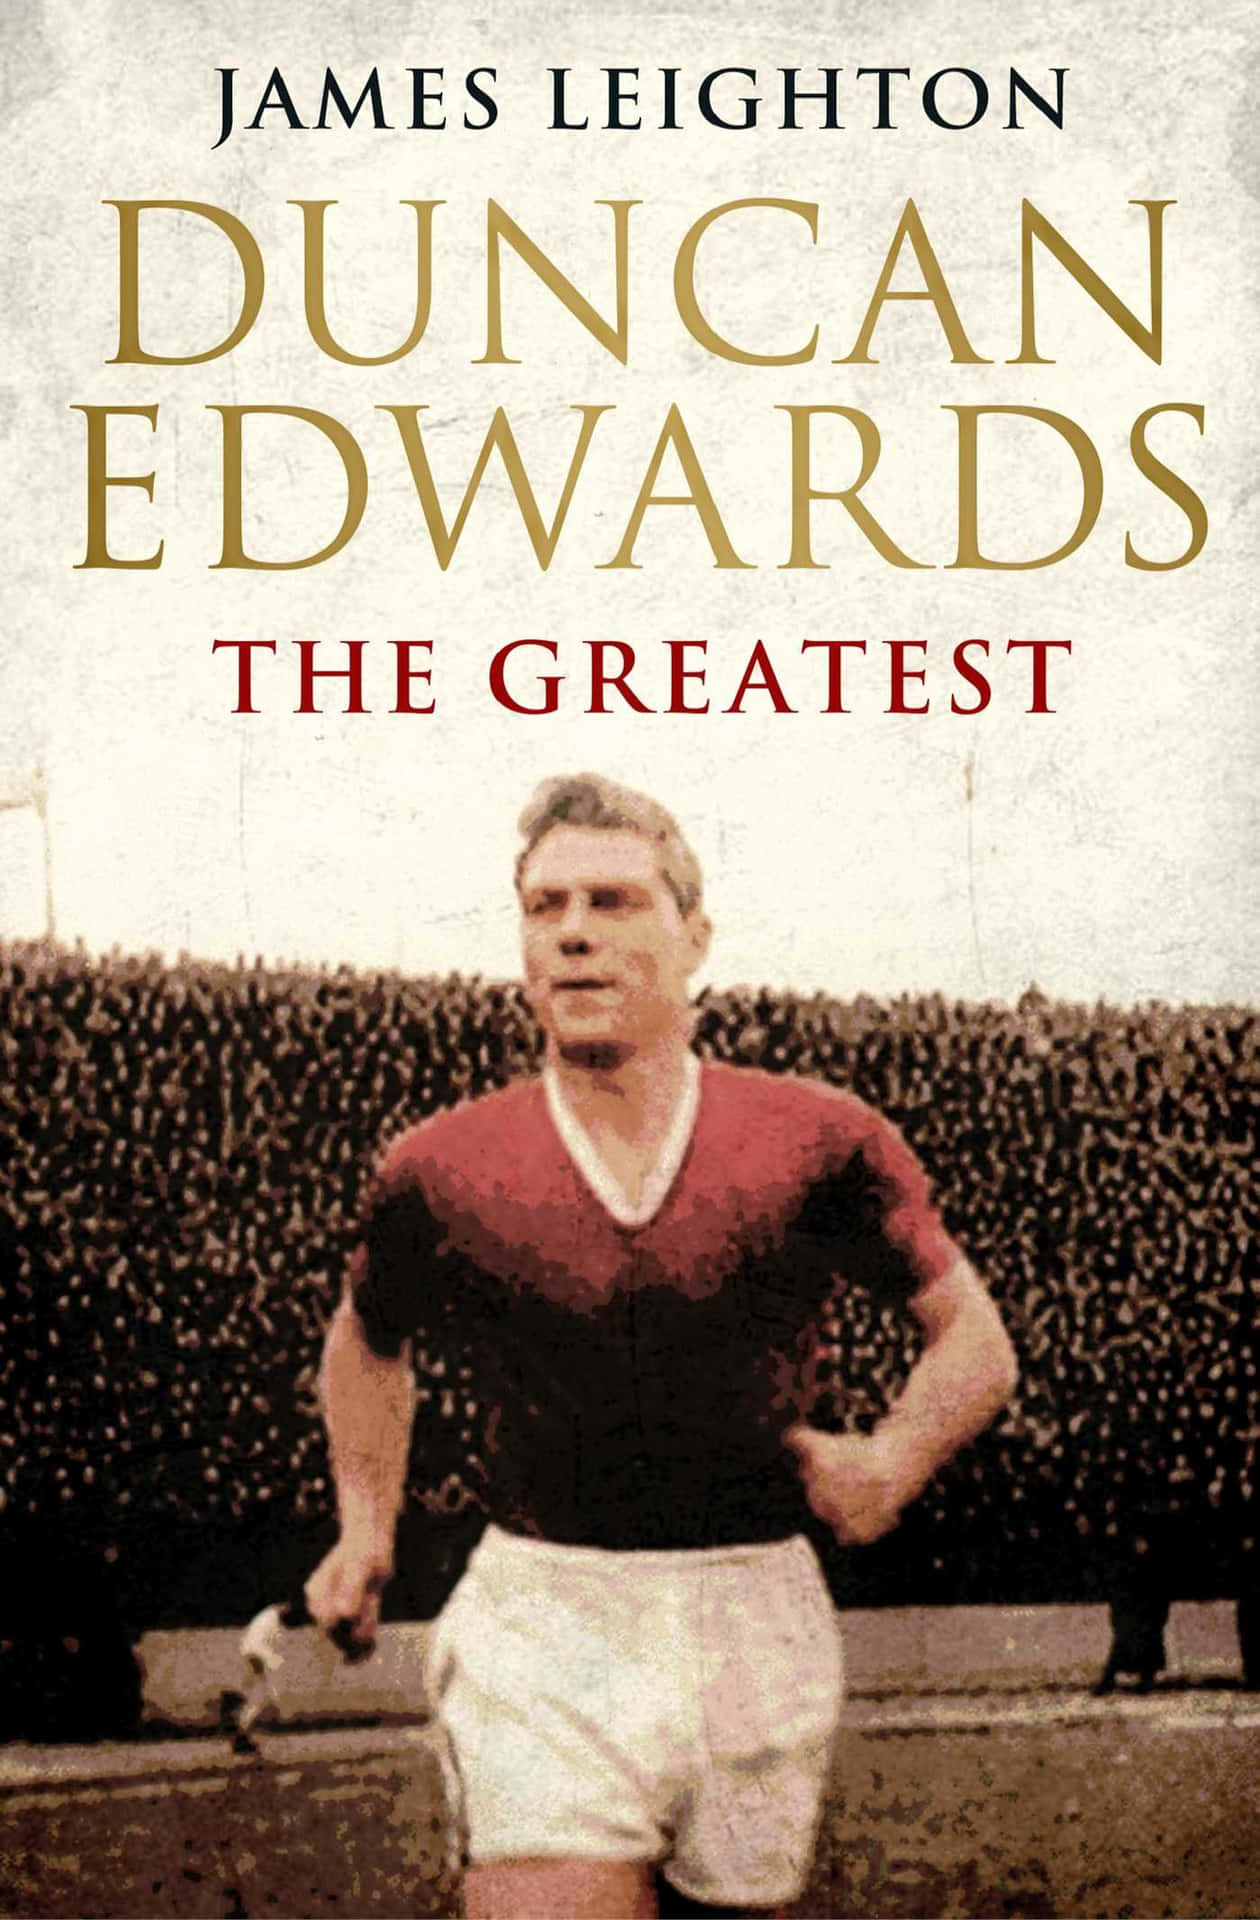 Duncan Edwards In Duncan Edwards: The Greatest By James Leighton Wallpaper